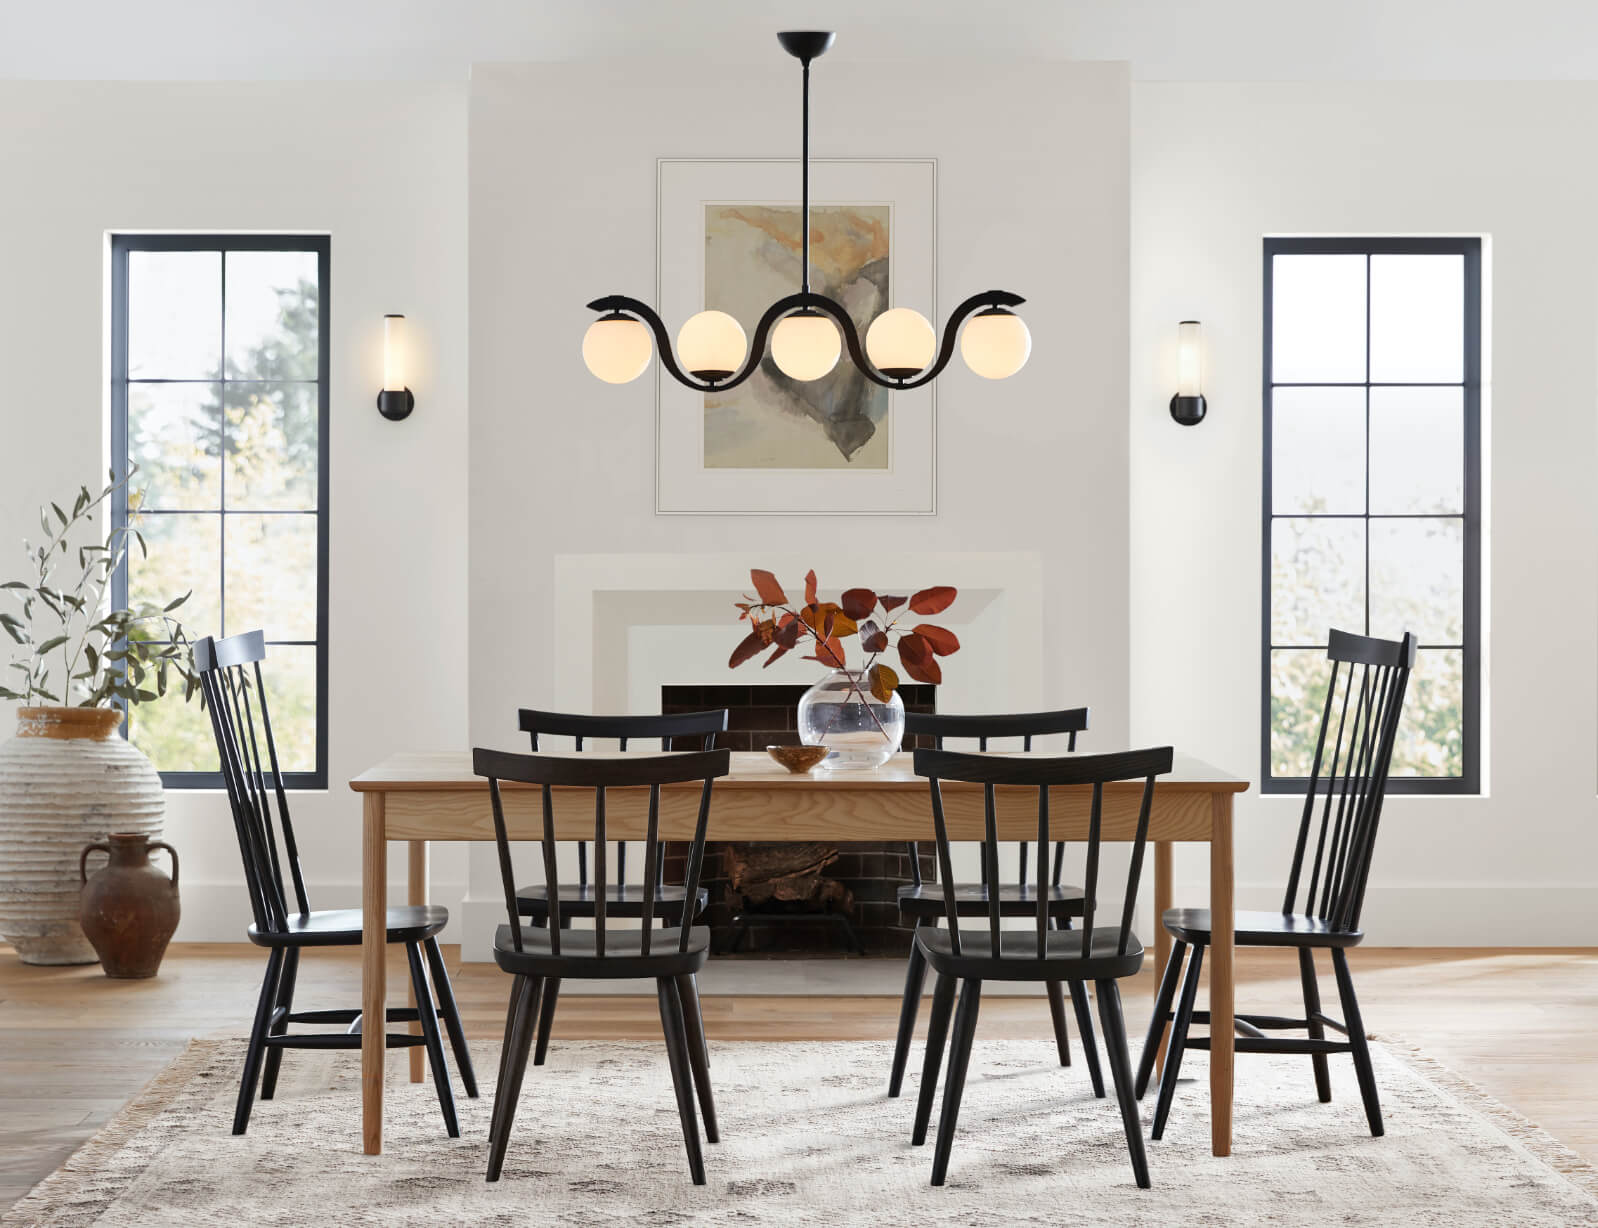 How To Choose Dining Room Lighting, What Size Chandelier For Rectangular Table